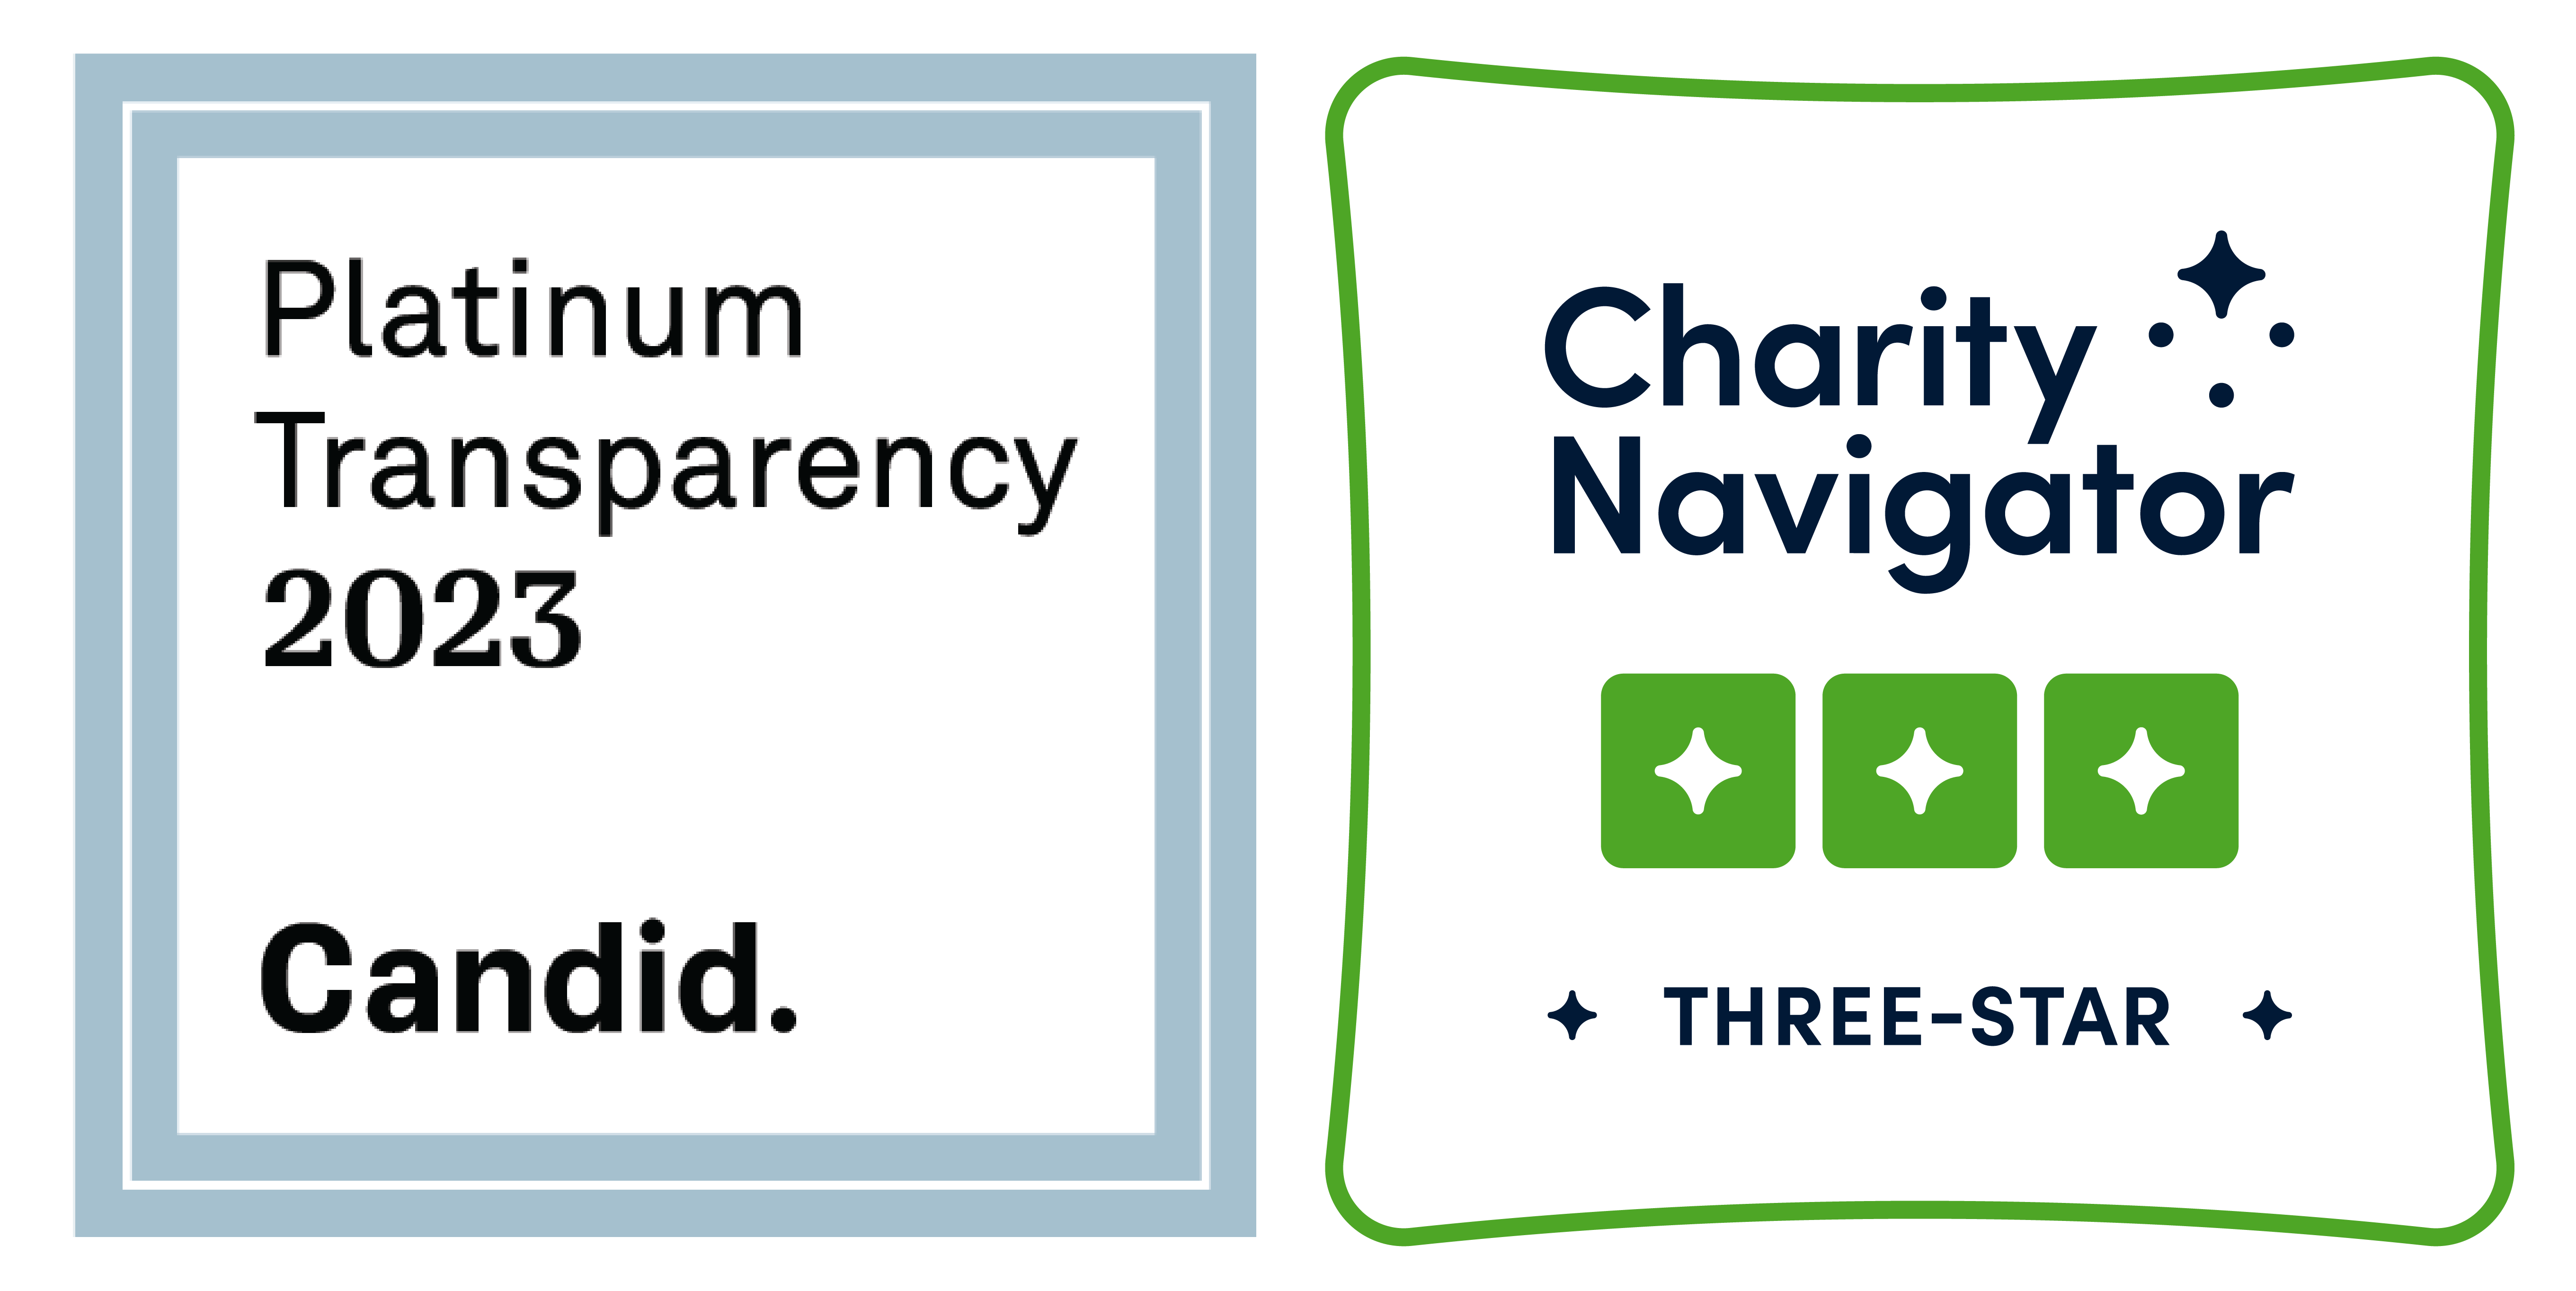 Candid Platinum Transparency 2023 and Charity Navigator three-star